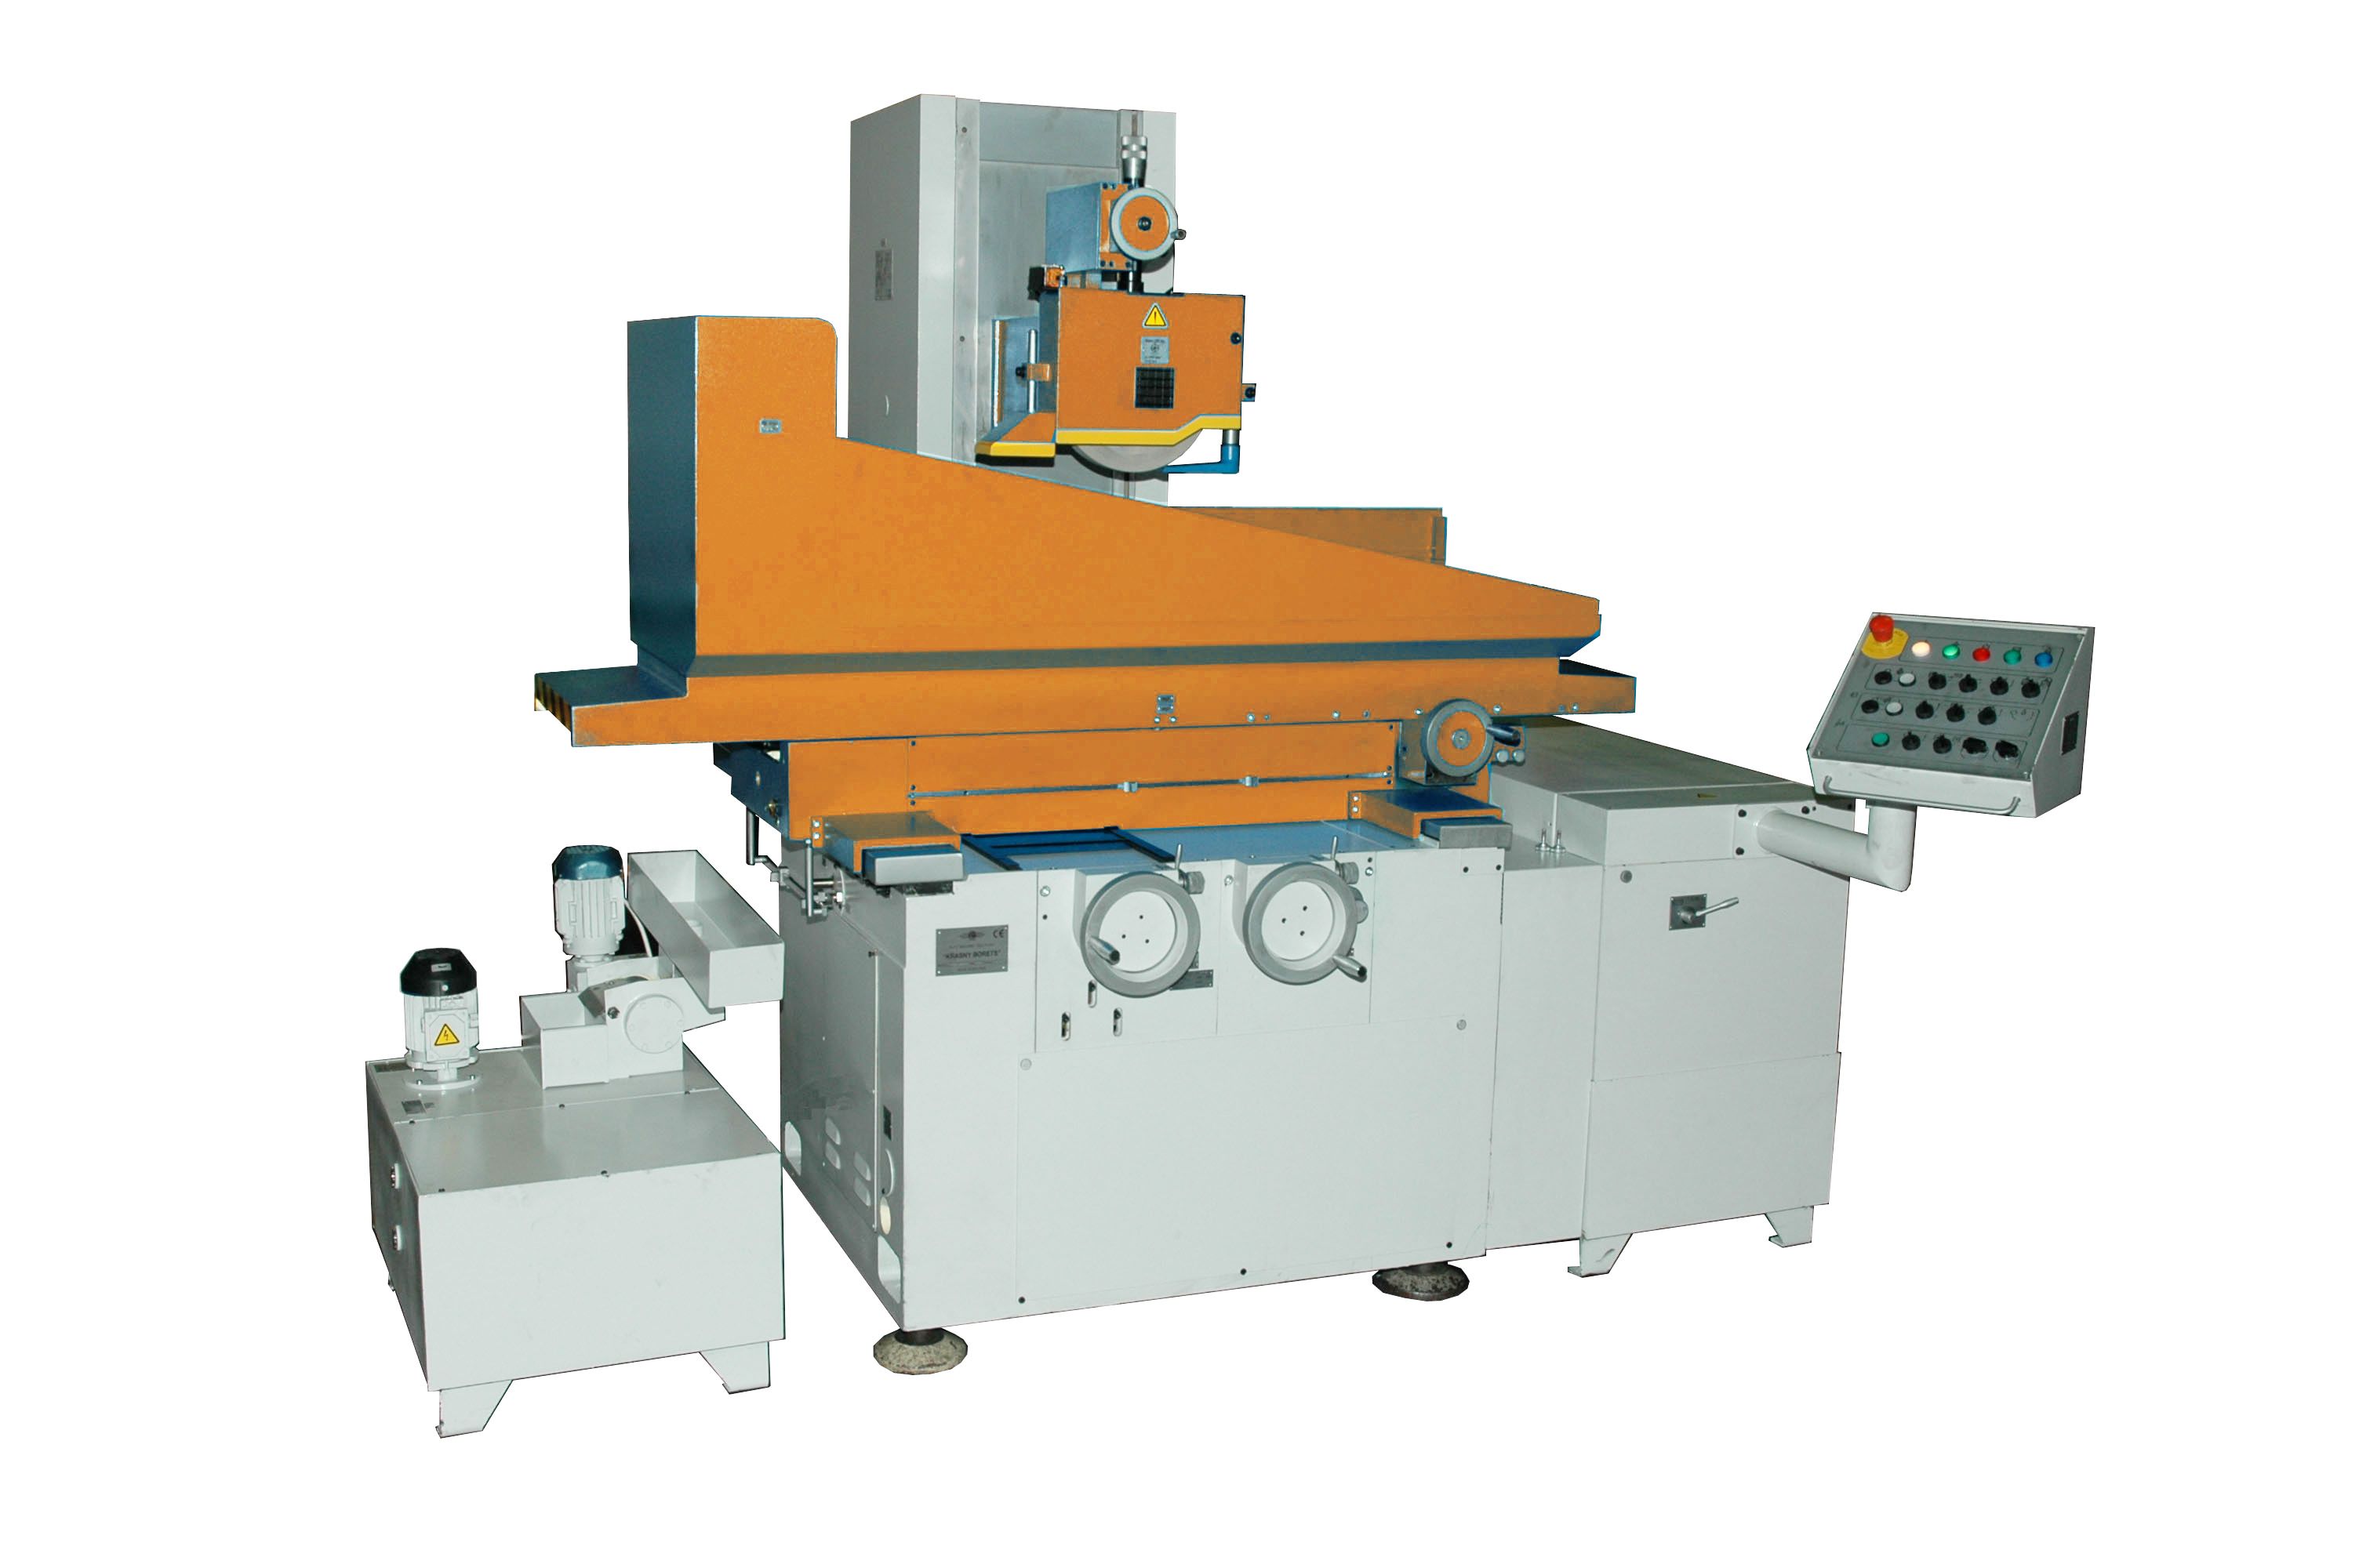 SURFACE GRINDING MACHINES